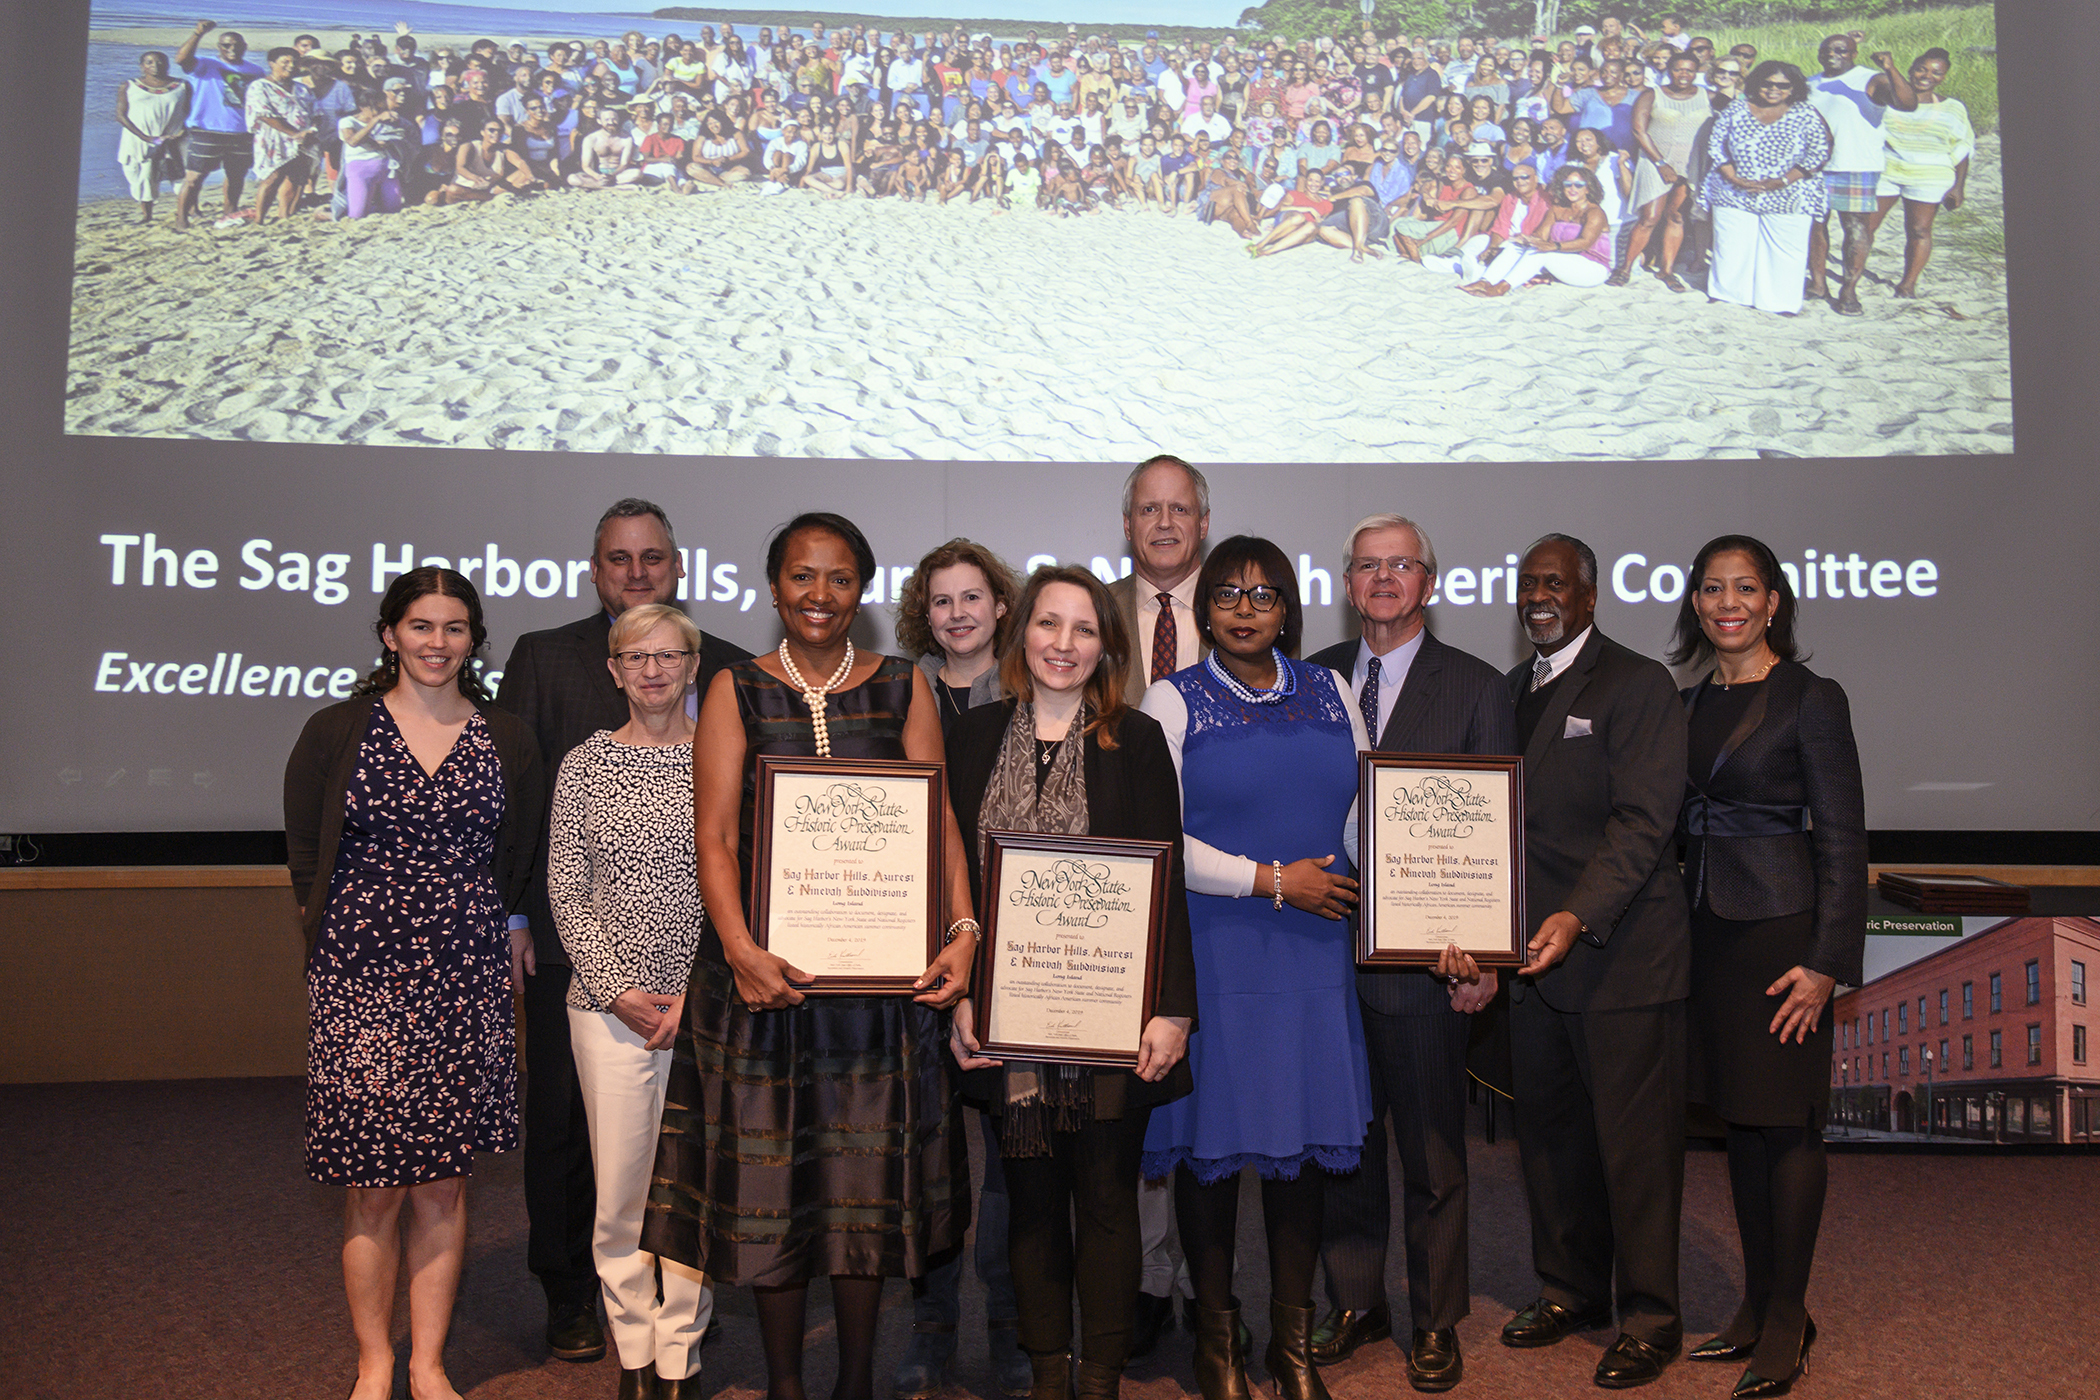 Members of the Sag Harbor Hills, Azurest and Ninevah (SANS) steering committee were honored at the New York State Preservation Awards at the Huxley Auditorium at the New York State Museum in Albany last month. Among those in the photo are, from left to right with plaques, SANS president Renee Simons, Sarah Kautz of Preservation Long Island, and Georgette Grier-Key, the director of the Eastville Community Historical Society. Other guests included, from left to right, Assemblyman Fred W. Thiele Jr., Eglon Simons, the past Sag Harbor Hills president, and attorney Lisa Stenson Desamours. The group, which was joined by representatives of state's Office of Parks and Historic Preservation, is standing in front of a photo of the 2019 Labor Day weekend gathering of SANS residents taken by John Pinderhughes. 